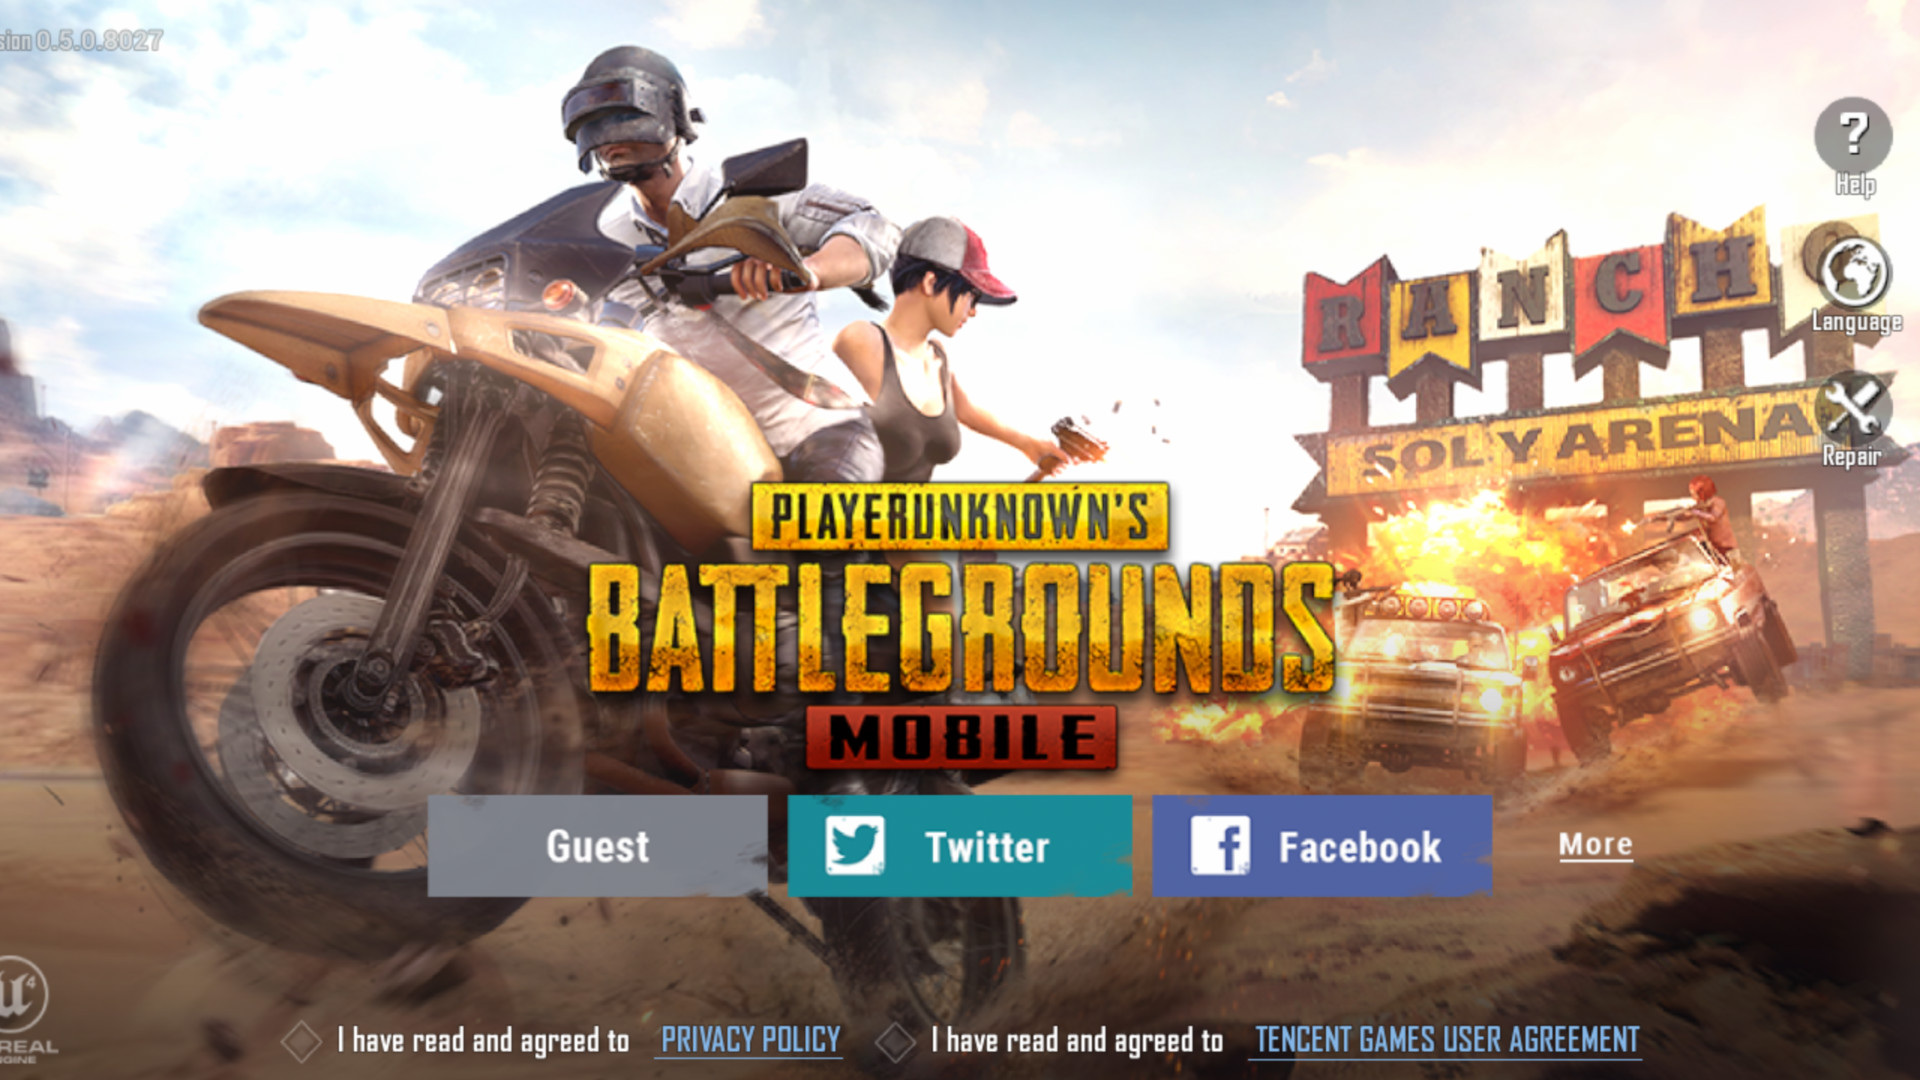 Pubg mobile update today